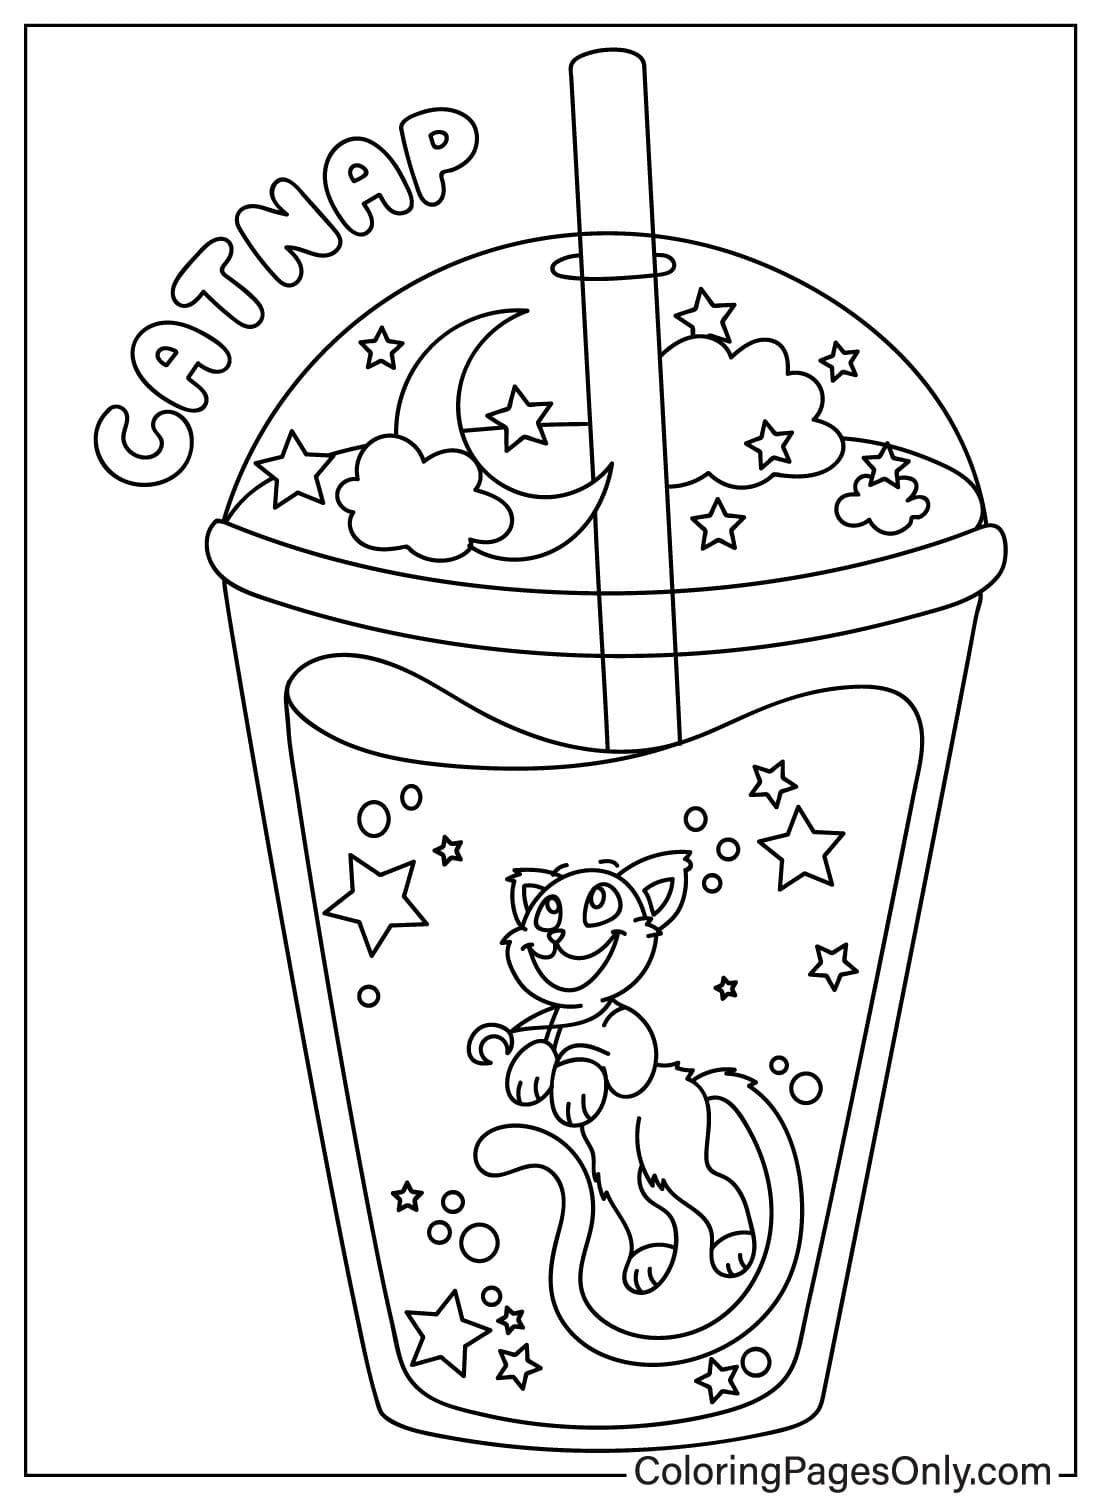 CatNap Coloring Pages to Printable from CatNap